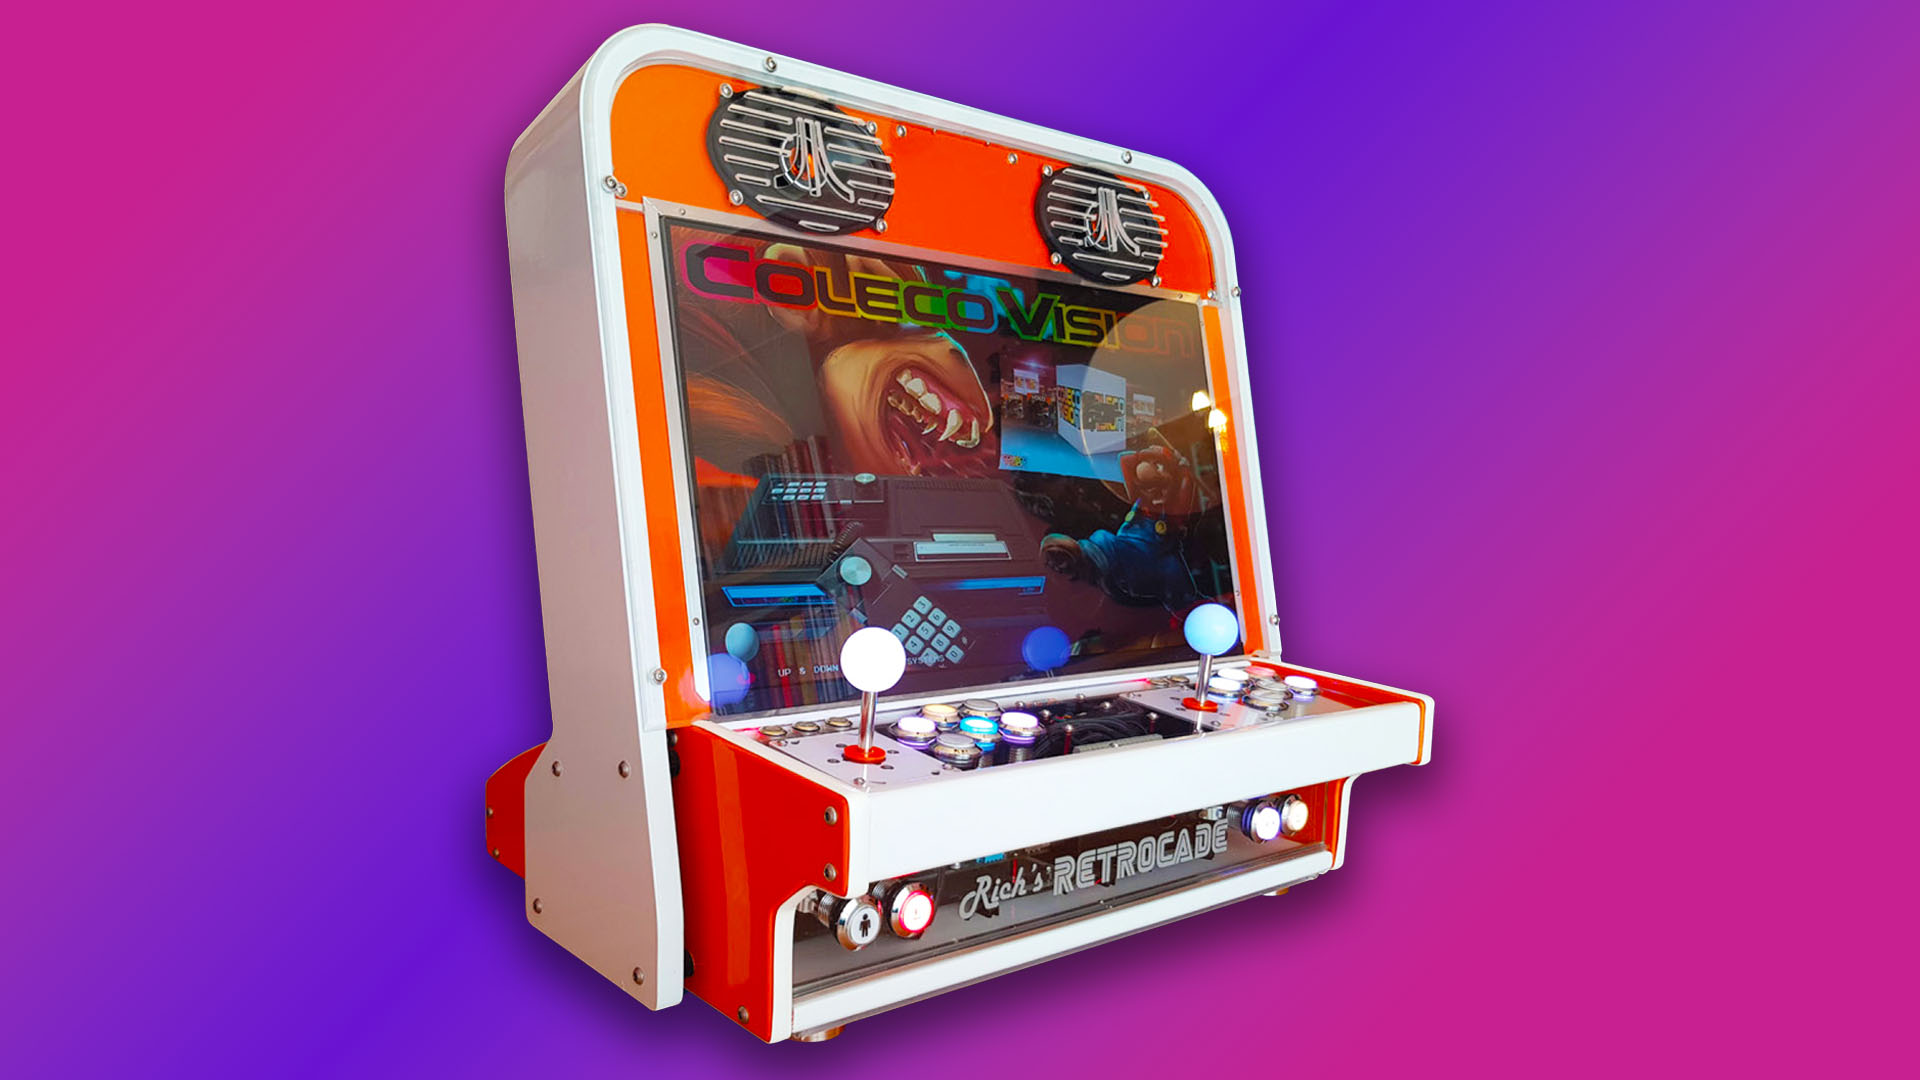 You'll want to mash the buttons on this retro arcade gaming PC